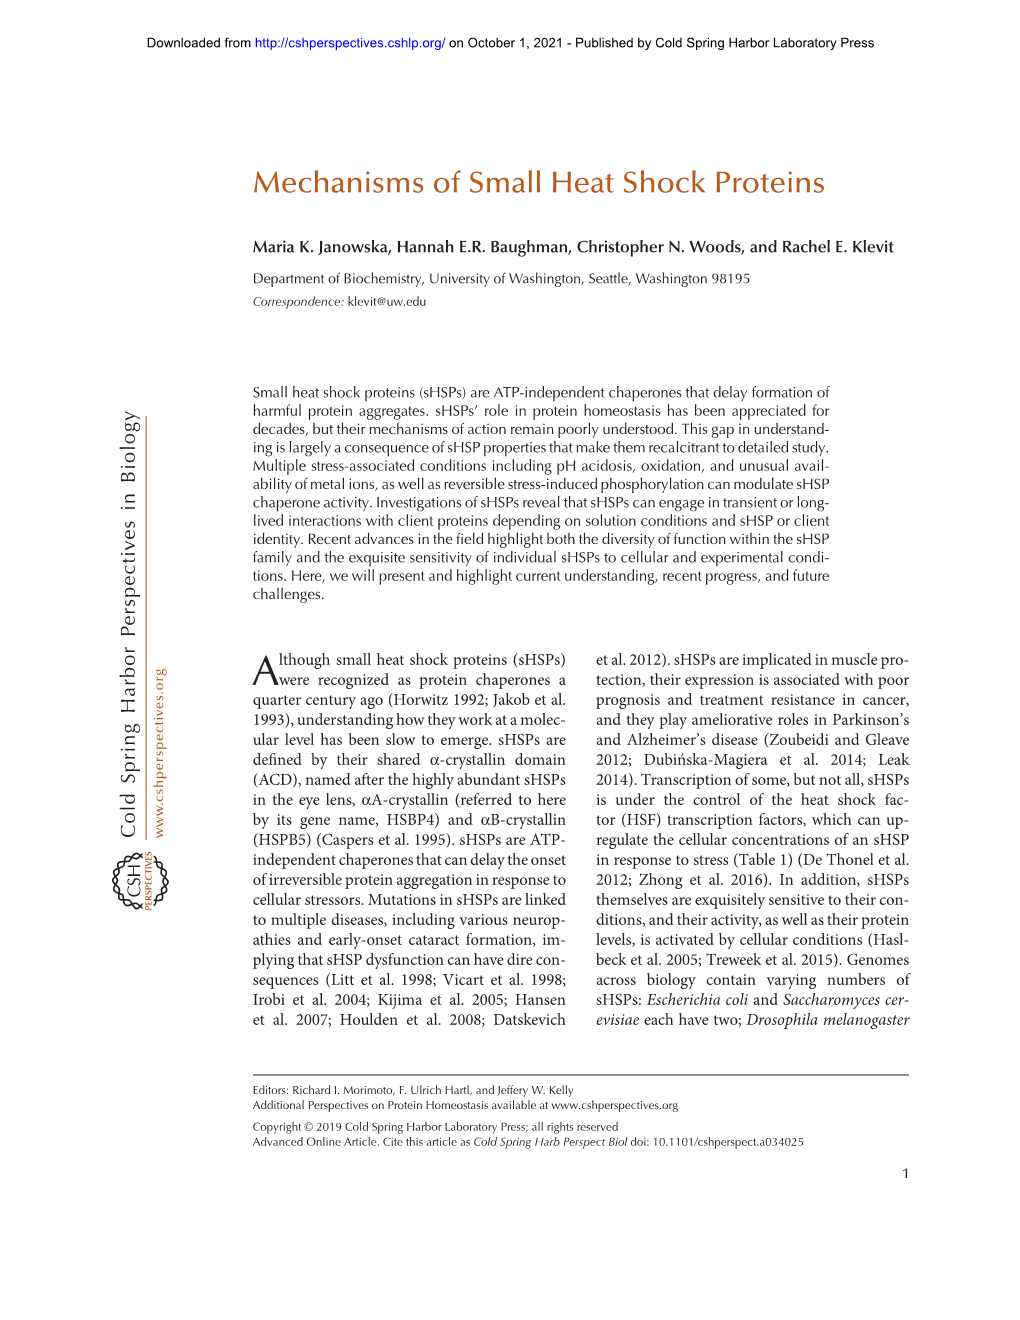 Mechanisms of Small Heat Shock Proteins